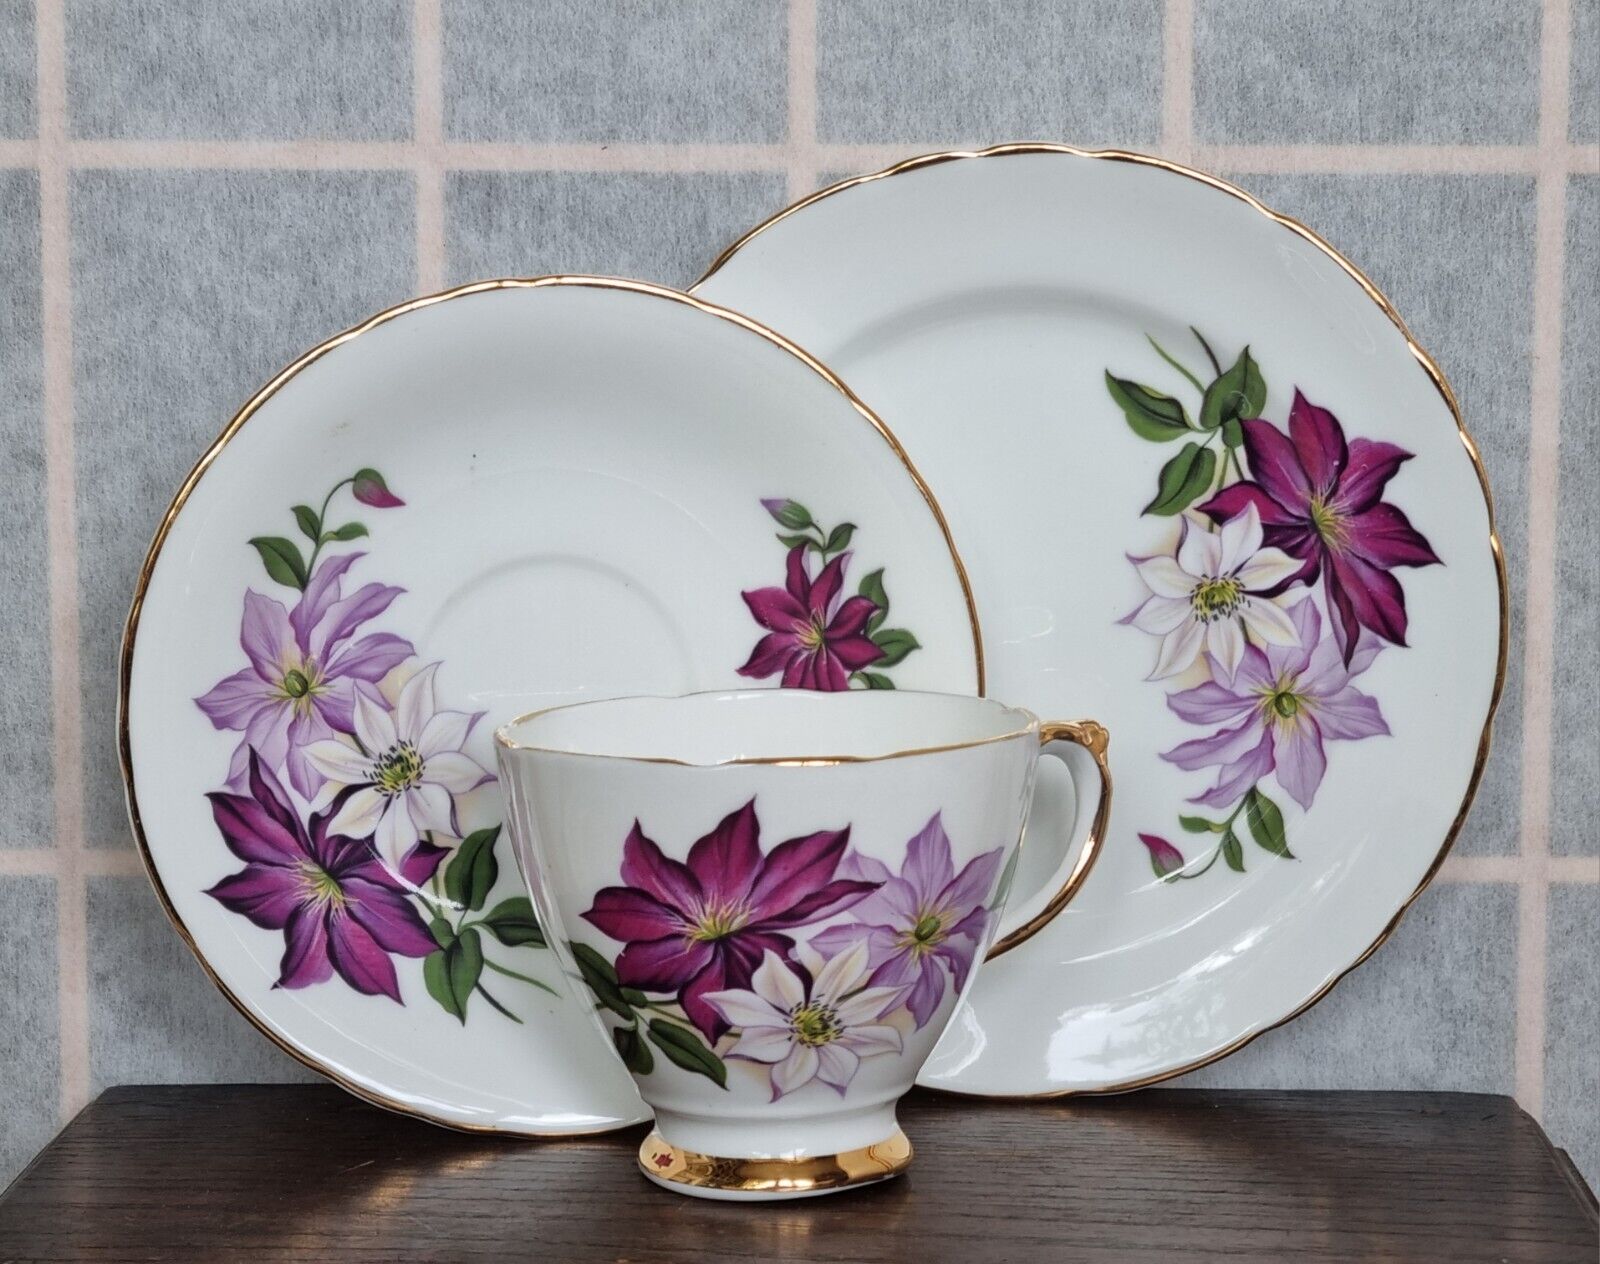 Vintage Tea Cup And Saucer Trio Plate English Delphine China Purple Clematis